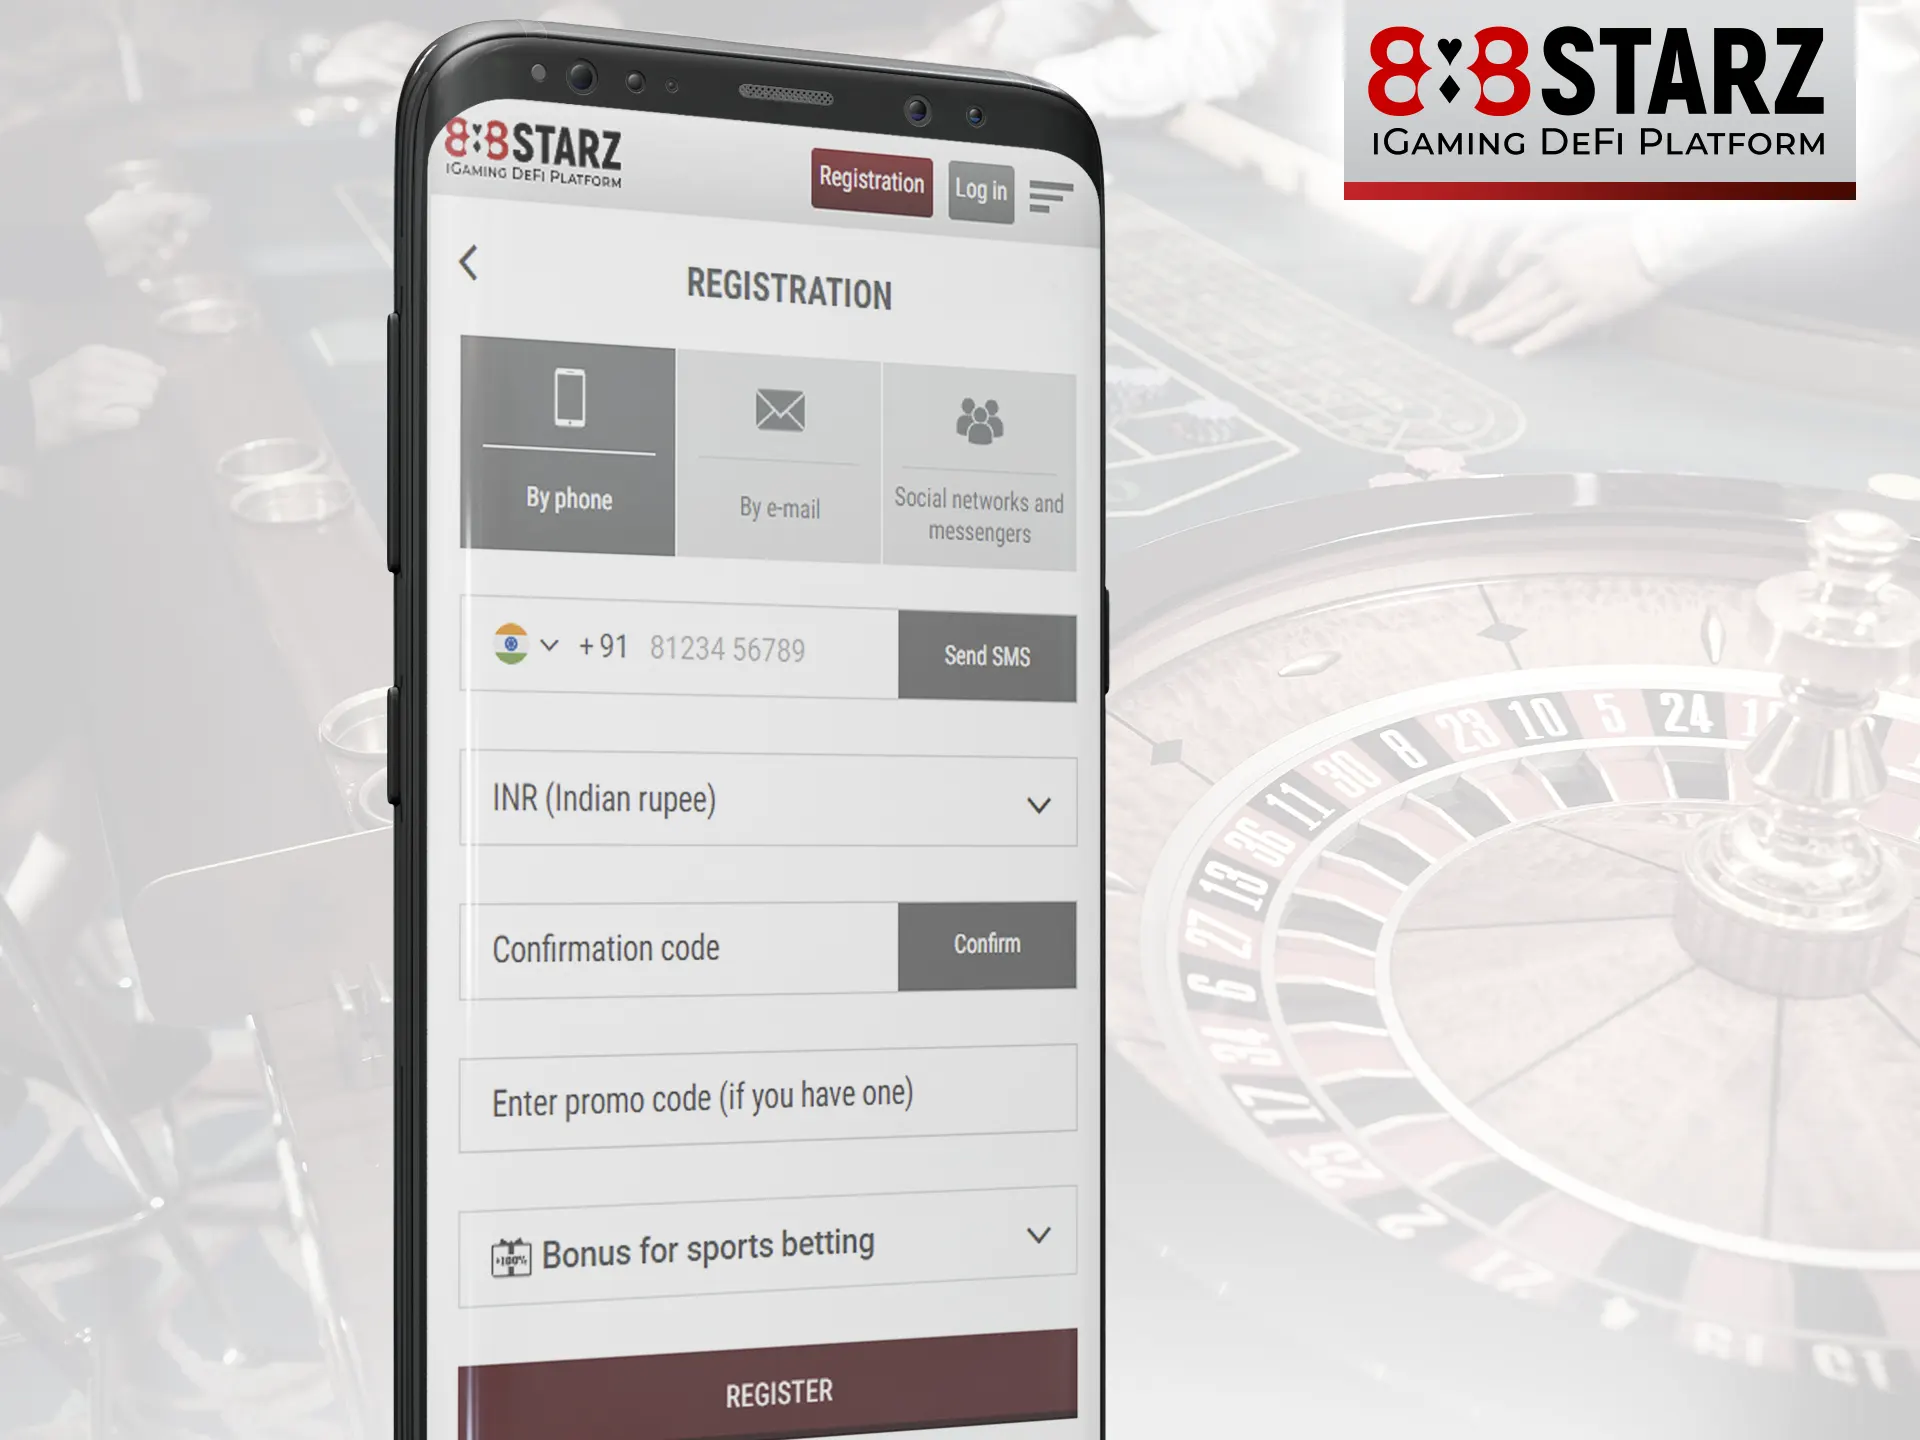 Go through the registration process on the 888Starz mobile app.